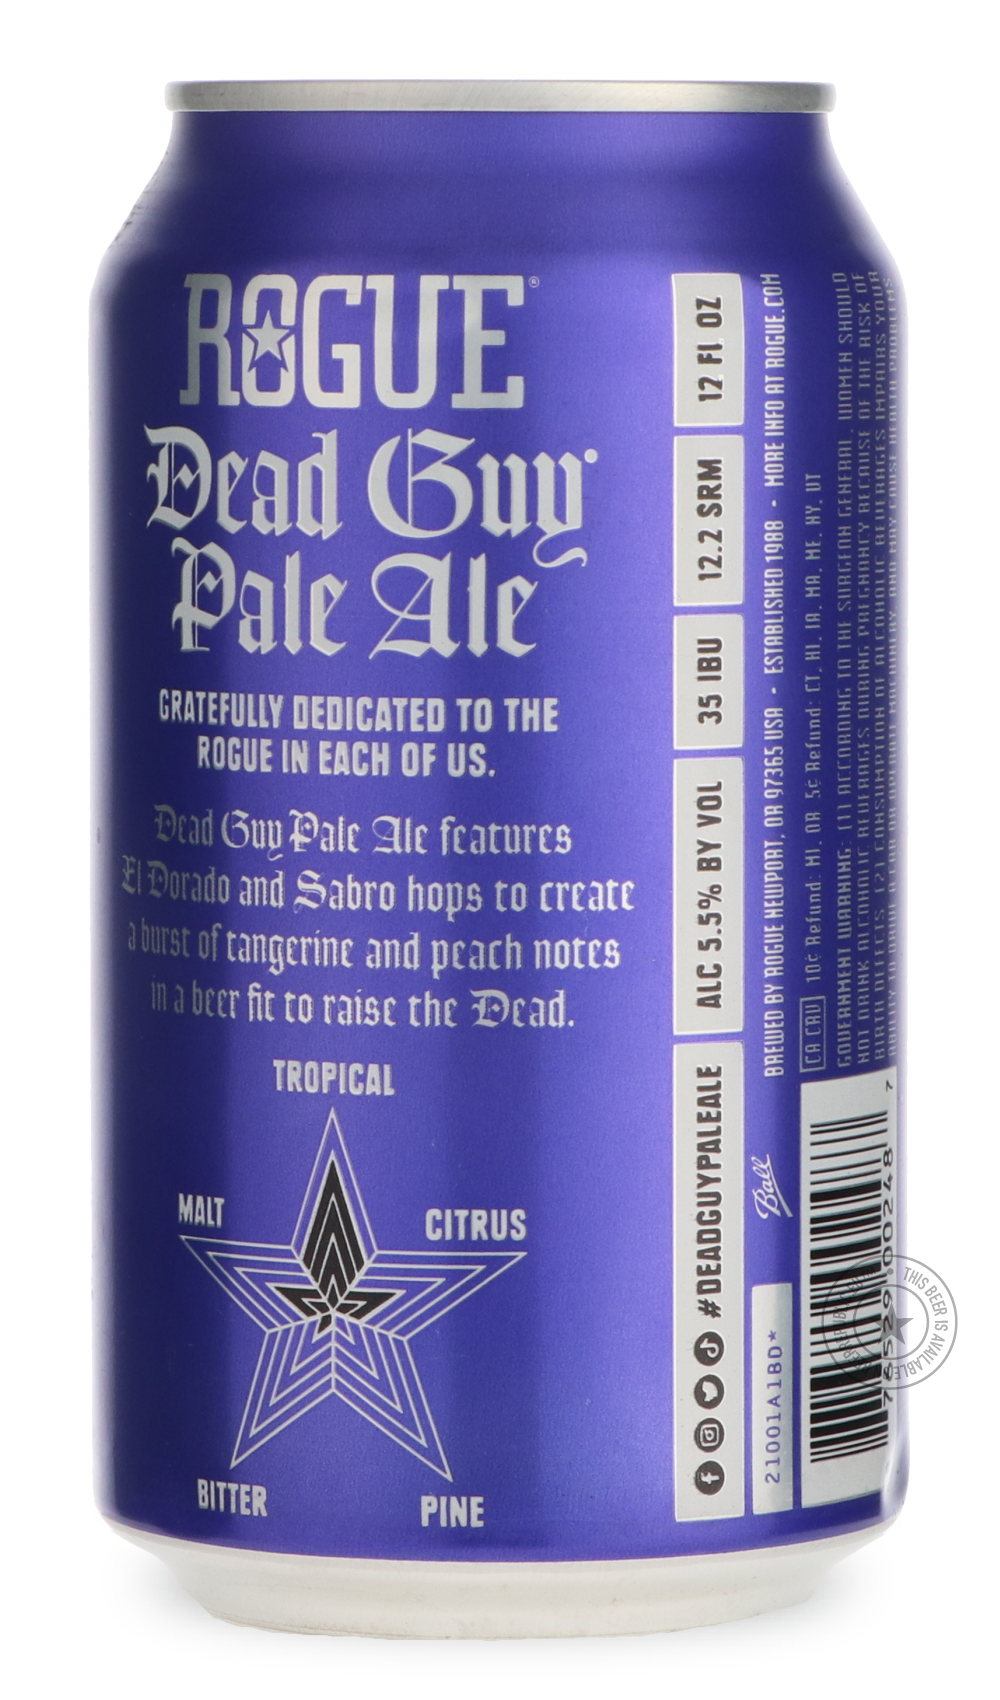 -Rogue- Dead Guy Pale Ale-Pale- Only @ Beer Republic - The best online beer store for American & Canadian craft beer - Buy beer online from the USA and Canada - Bier online kopen - Amerikaans bier kopen - Craft beer store - Craft beer kopen - Amerikanisch bier kaufen - Bier online kaufen - Acheter biere online - IPA - Stout - Porter - New England IPA - Hazy IPA - Imperial Stout - Barrel Aged - Barrel Aged Imperial Stout - Brown - Dark beer - Blond - Blonde - Pilsner - Lager - Wheat - Weizen - Amber - Barley